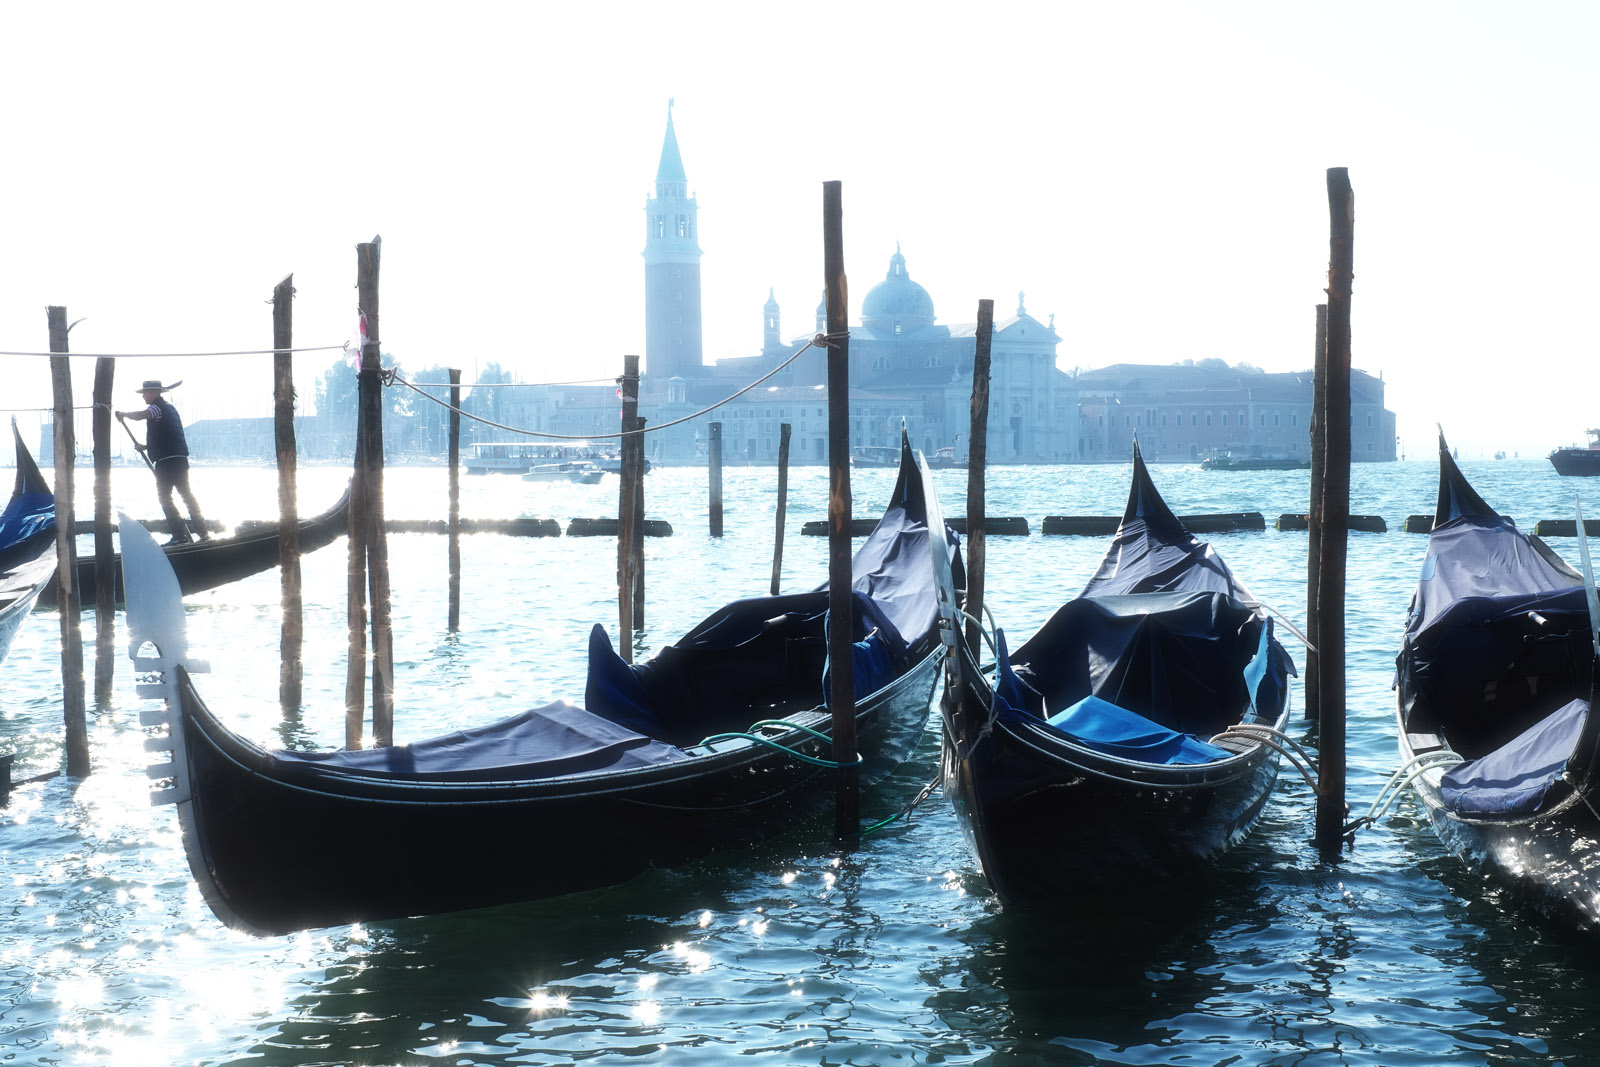 Gondolas moored by San Marco in a blue dawn light, Church of San Giorgio Maggiore in the background. Travel lifestyle and architecture photography by Kent Johnson.